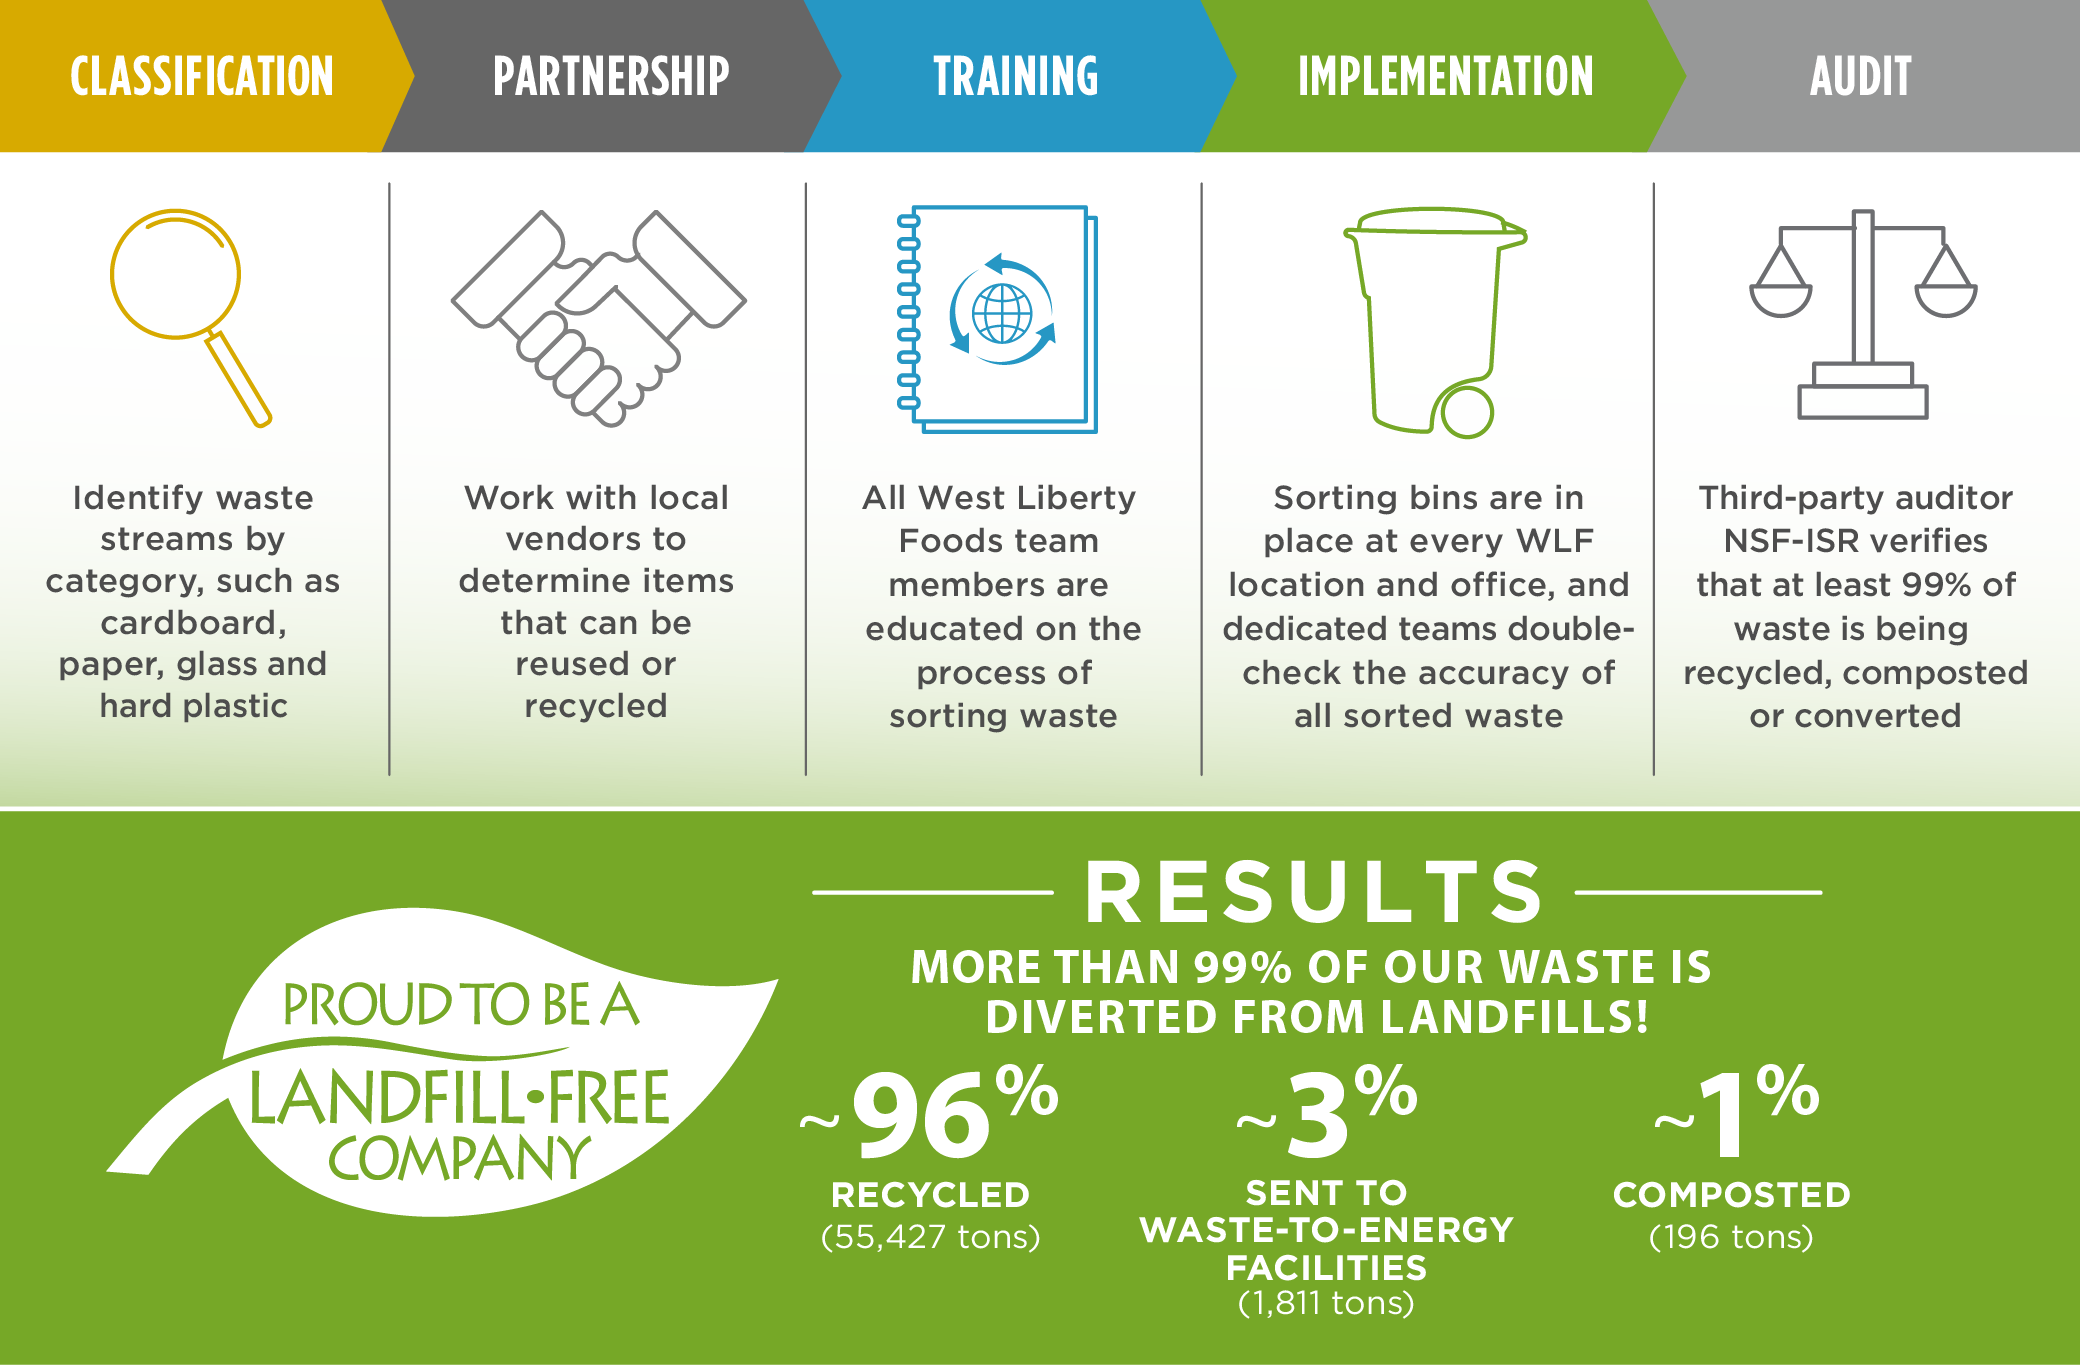 Proud To Be A Landfill-Free Company